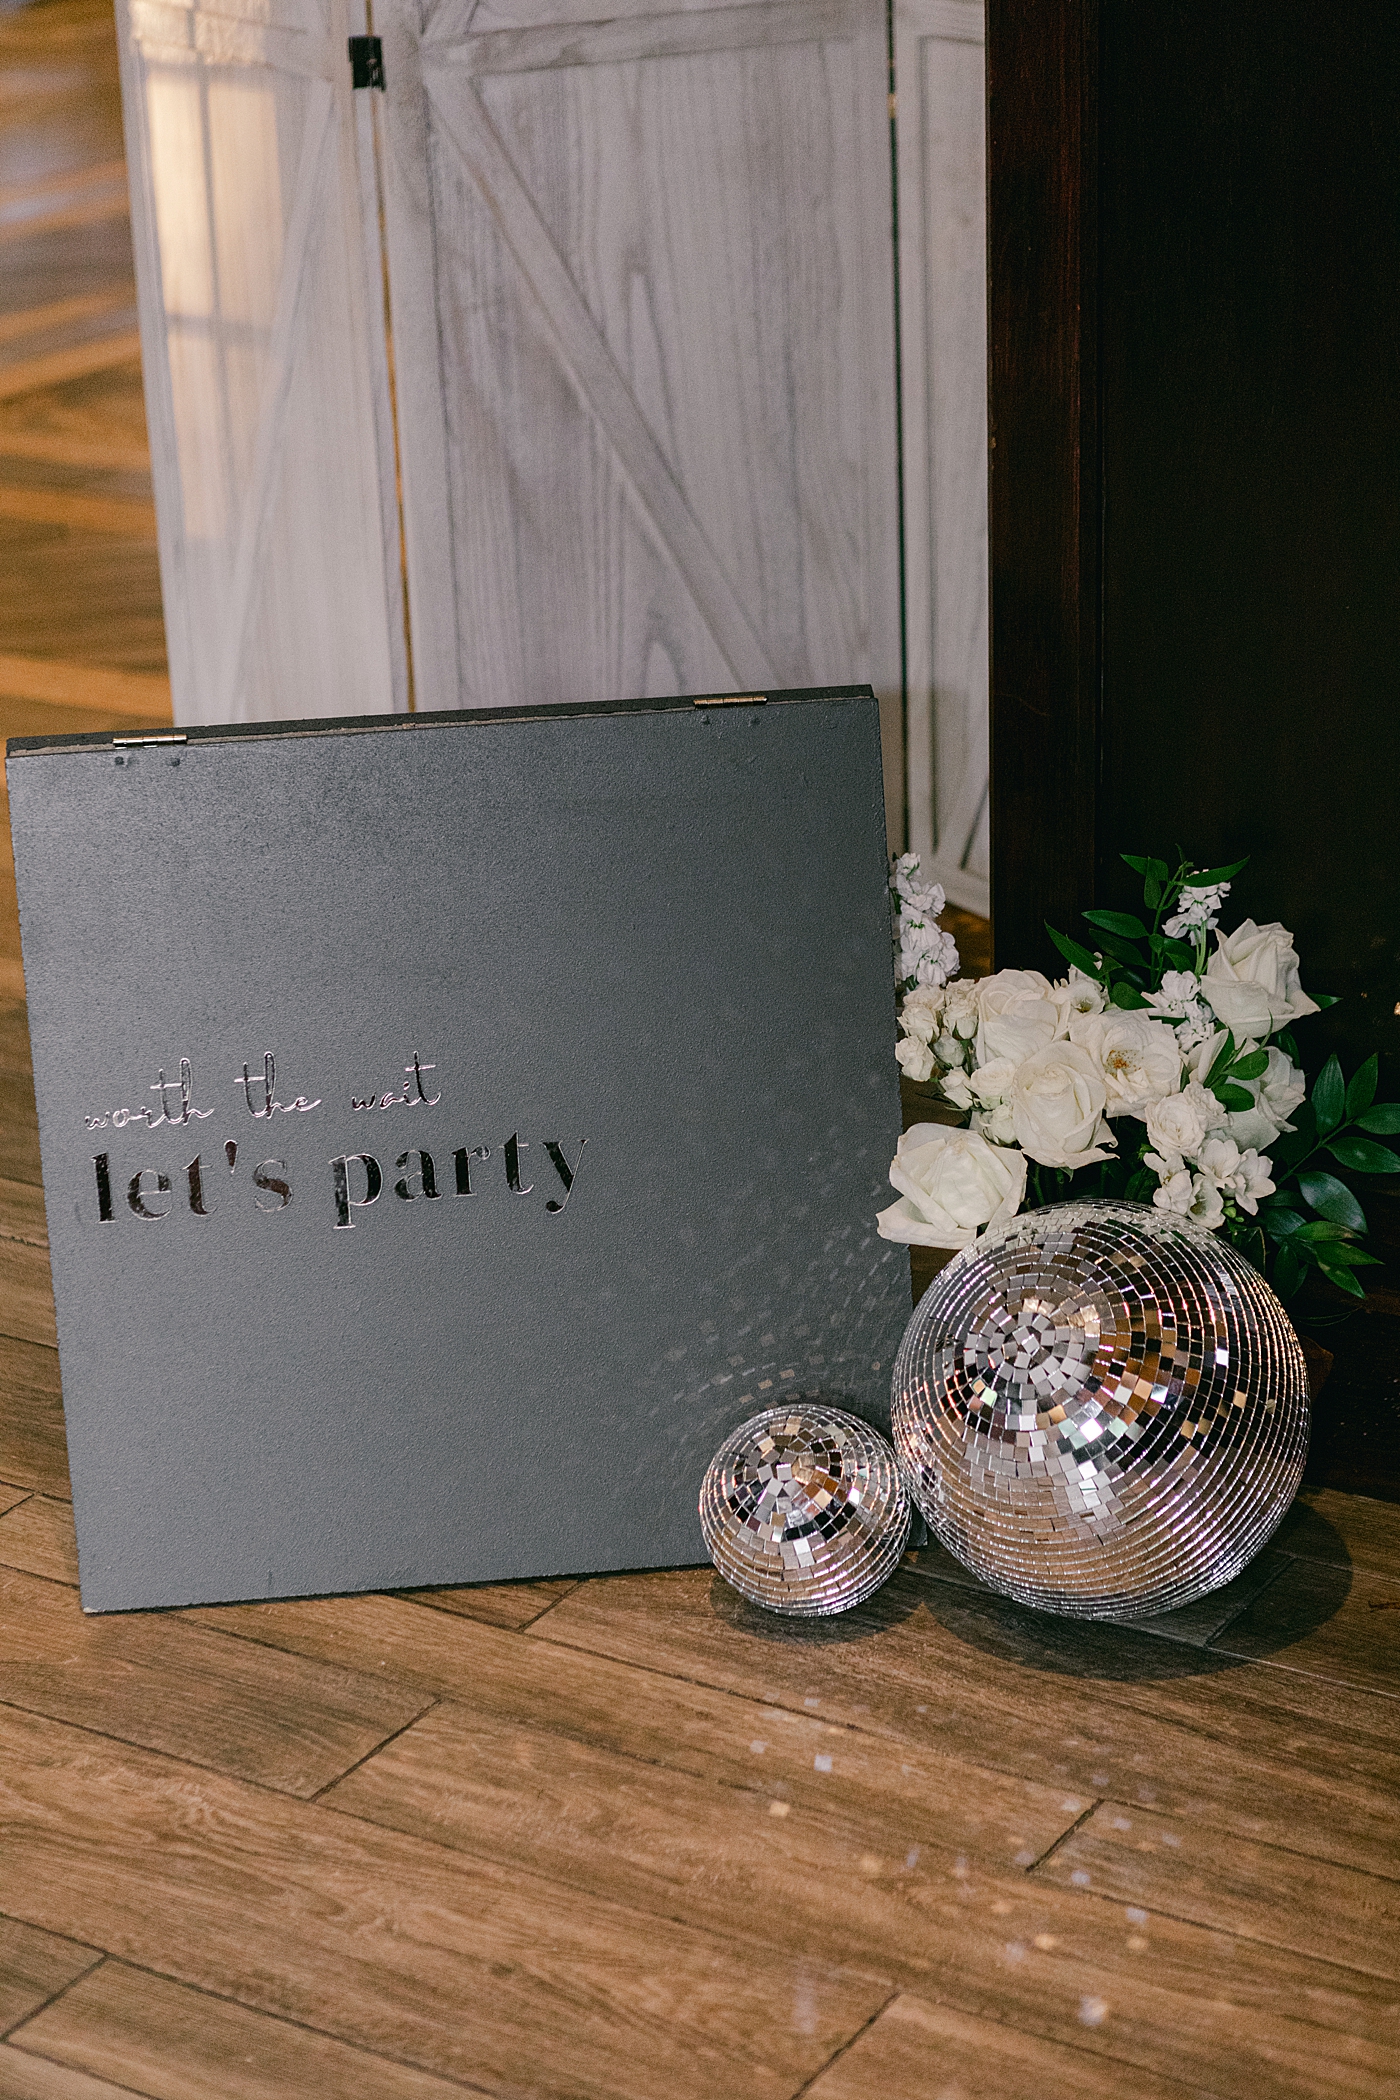 Wedding sign with disco balls | Image by Hope Helmuth Photography